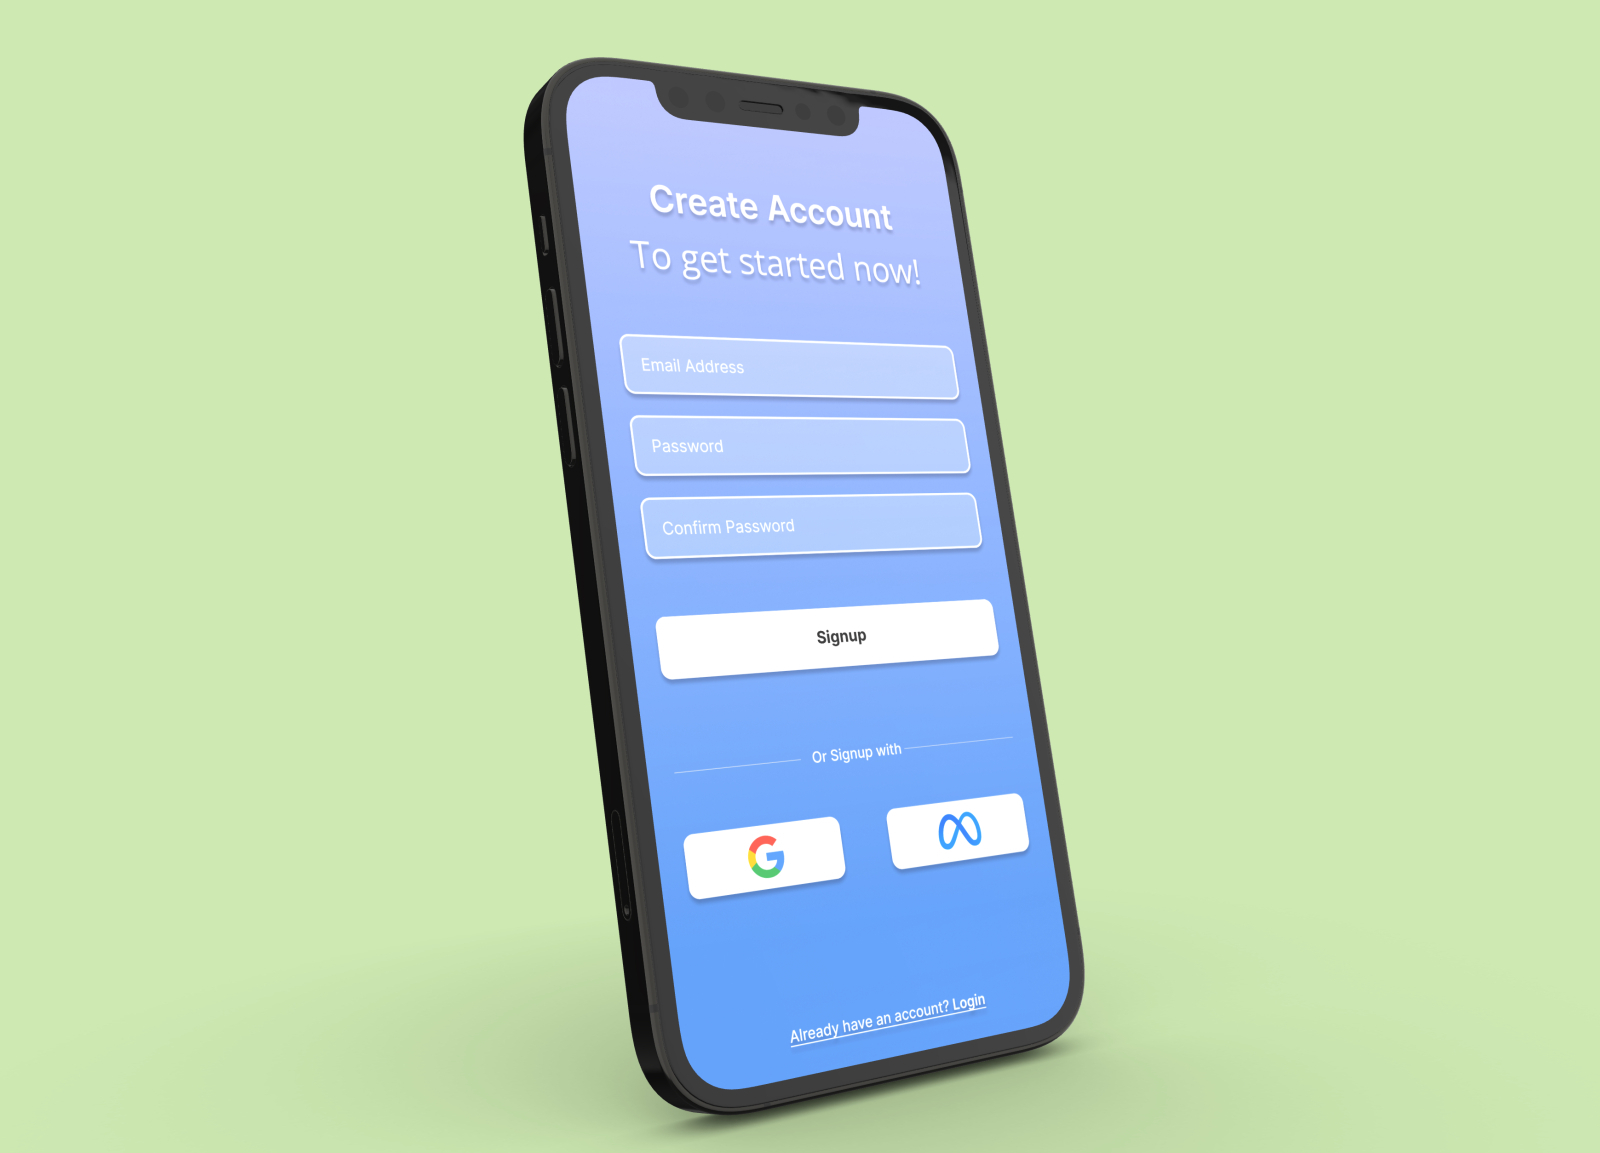 Create Account / Sign Up Mobile Screen by Ali Hassan on Dribbble